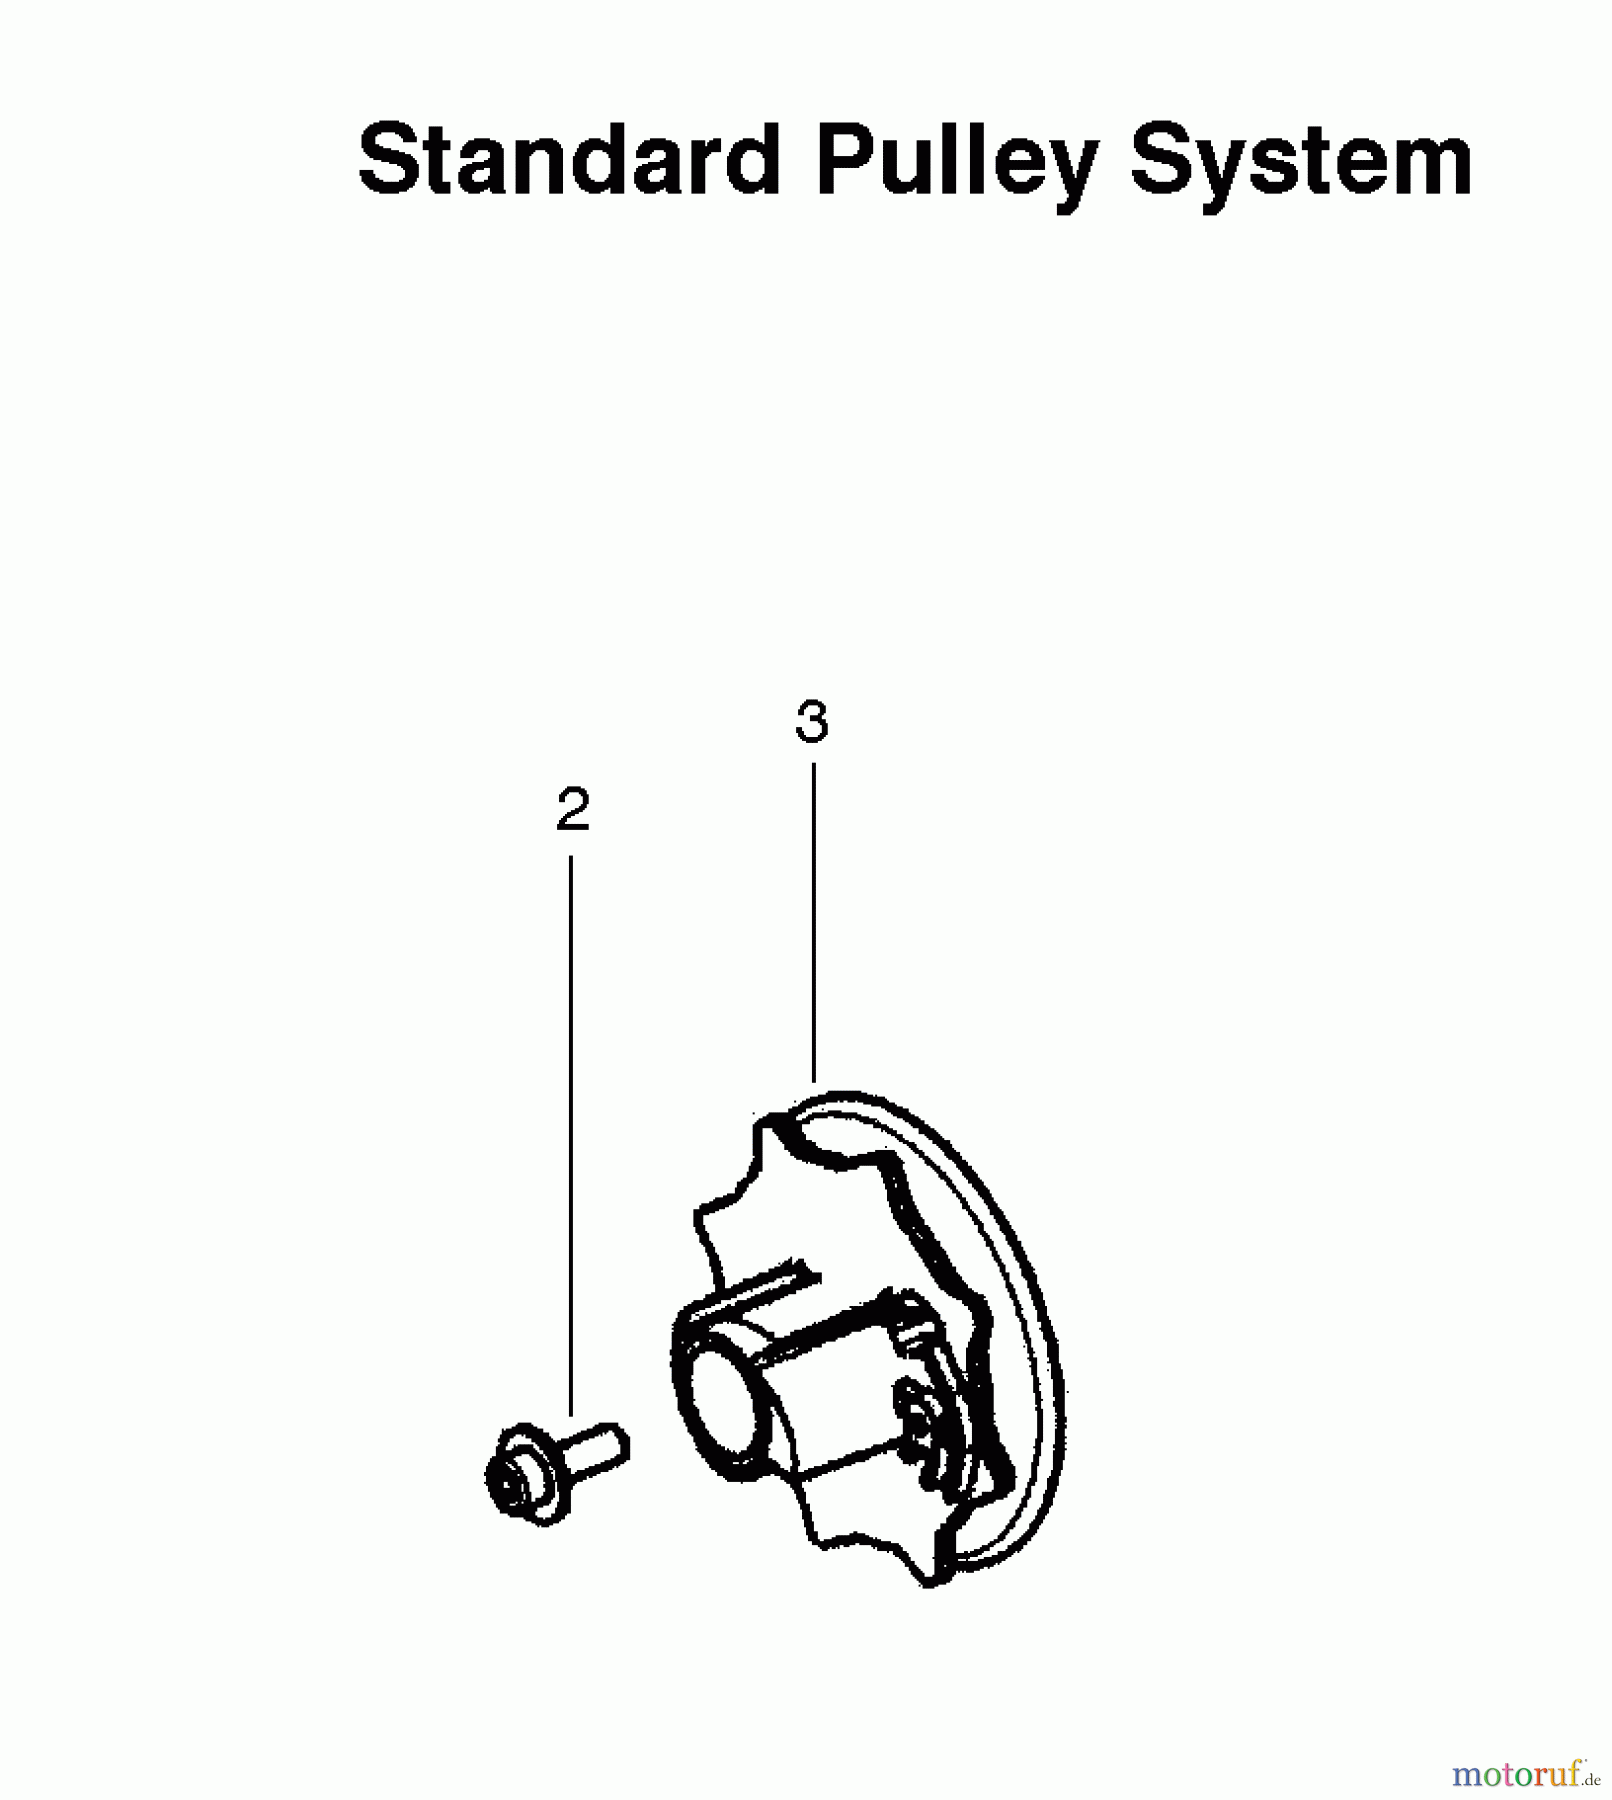  Poulan / Weed Eater Motorsägen P3314 (Type 2) - Poulan Chainsaw Standard Pulley System